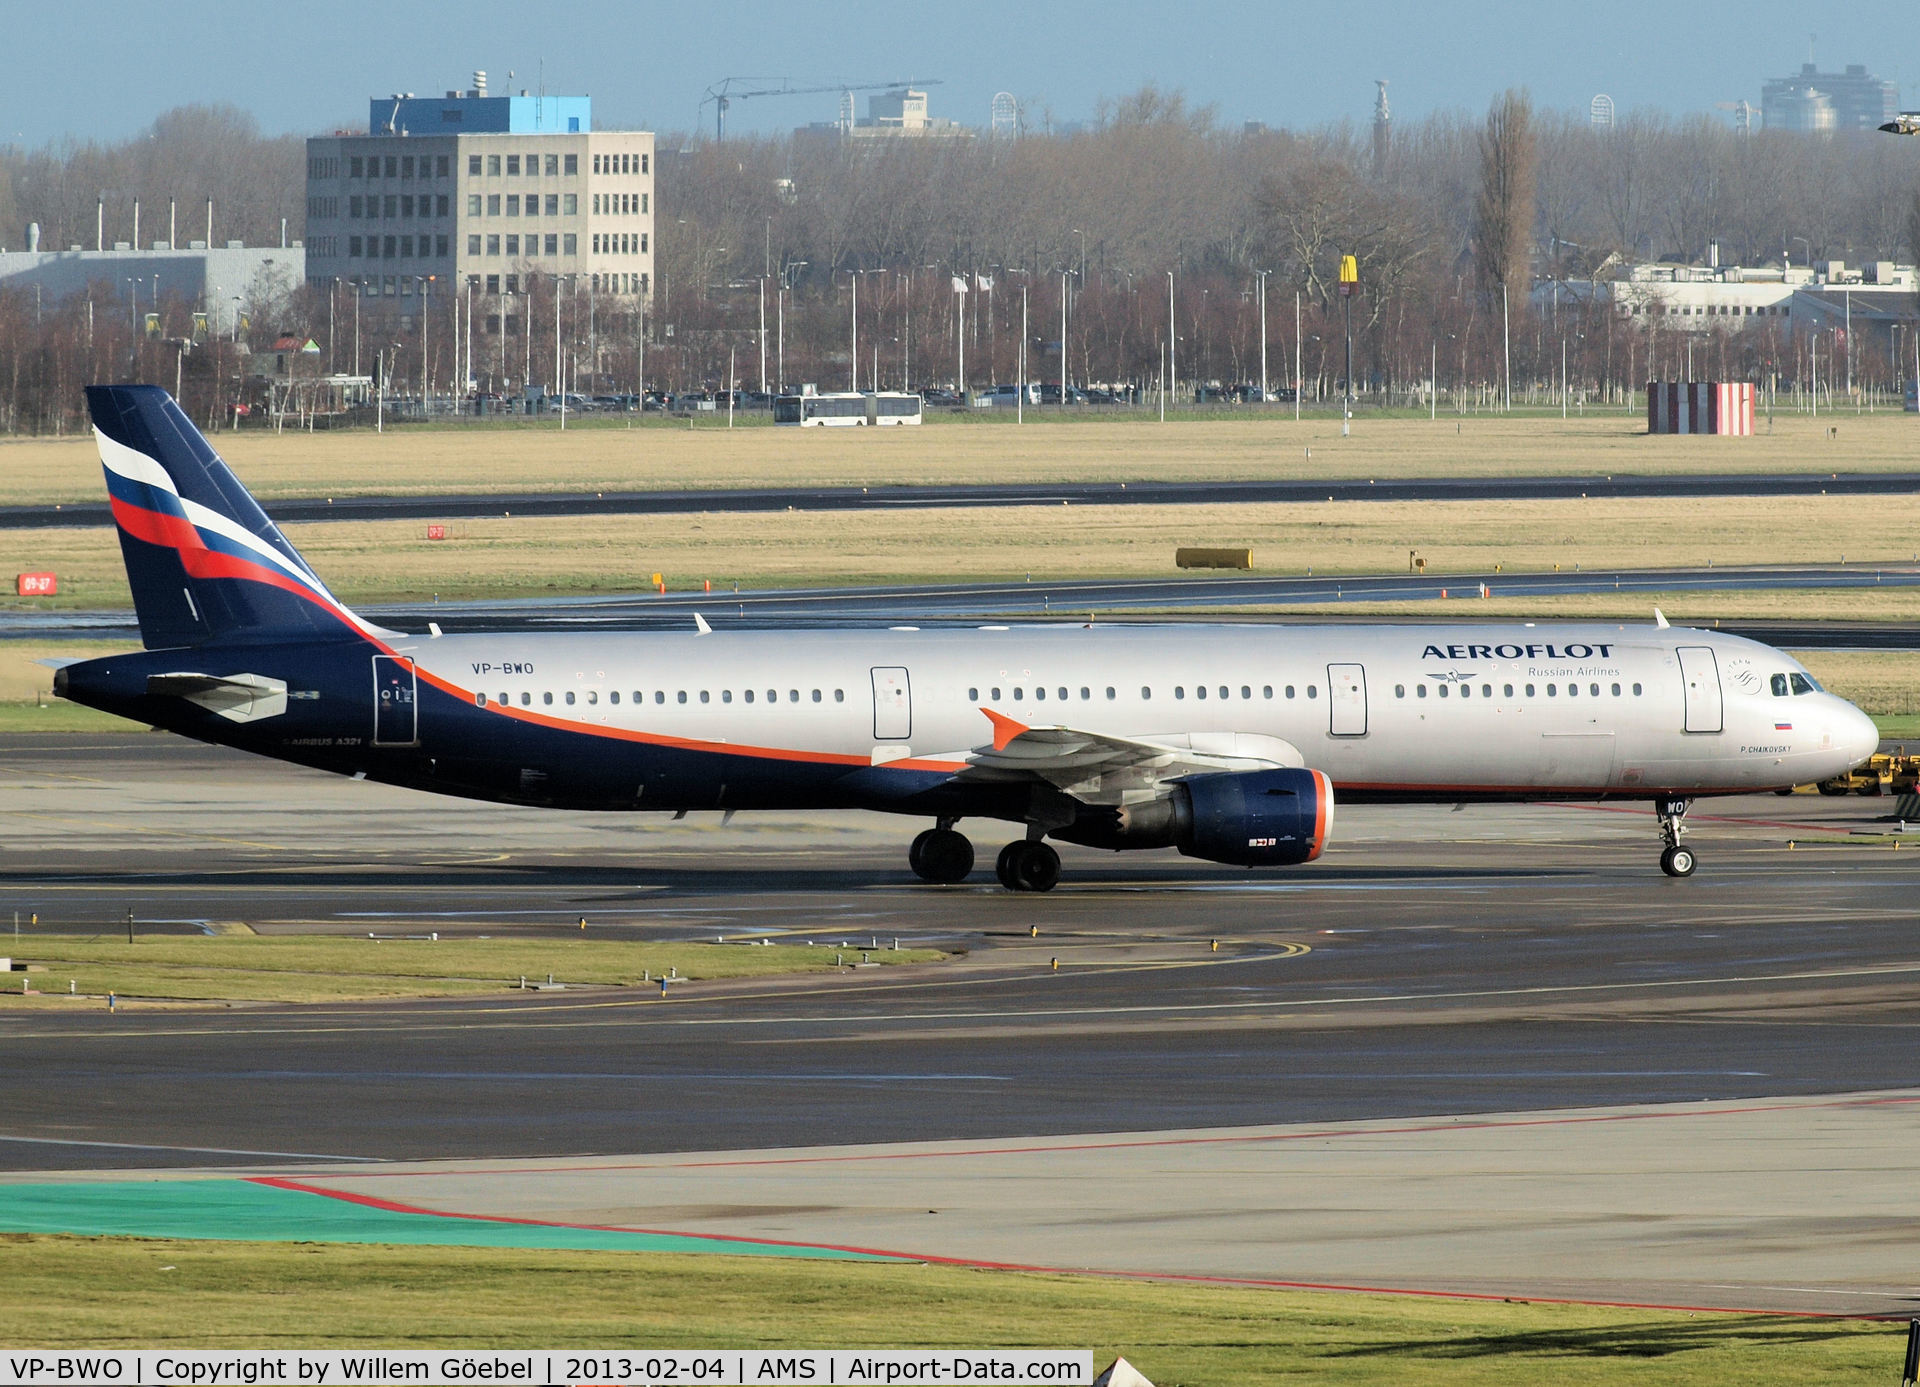 VP-BWO, 2004 Airbus A321-211 C/N 2337, Taxi to runway 24 of Schiphol Airport